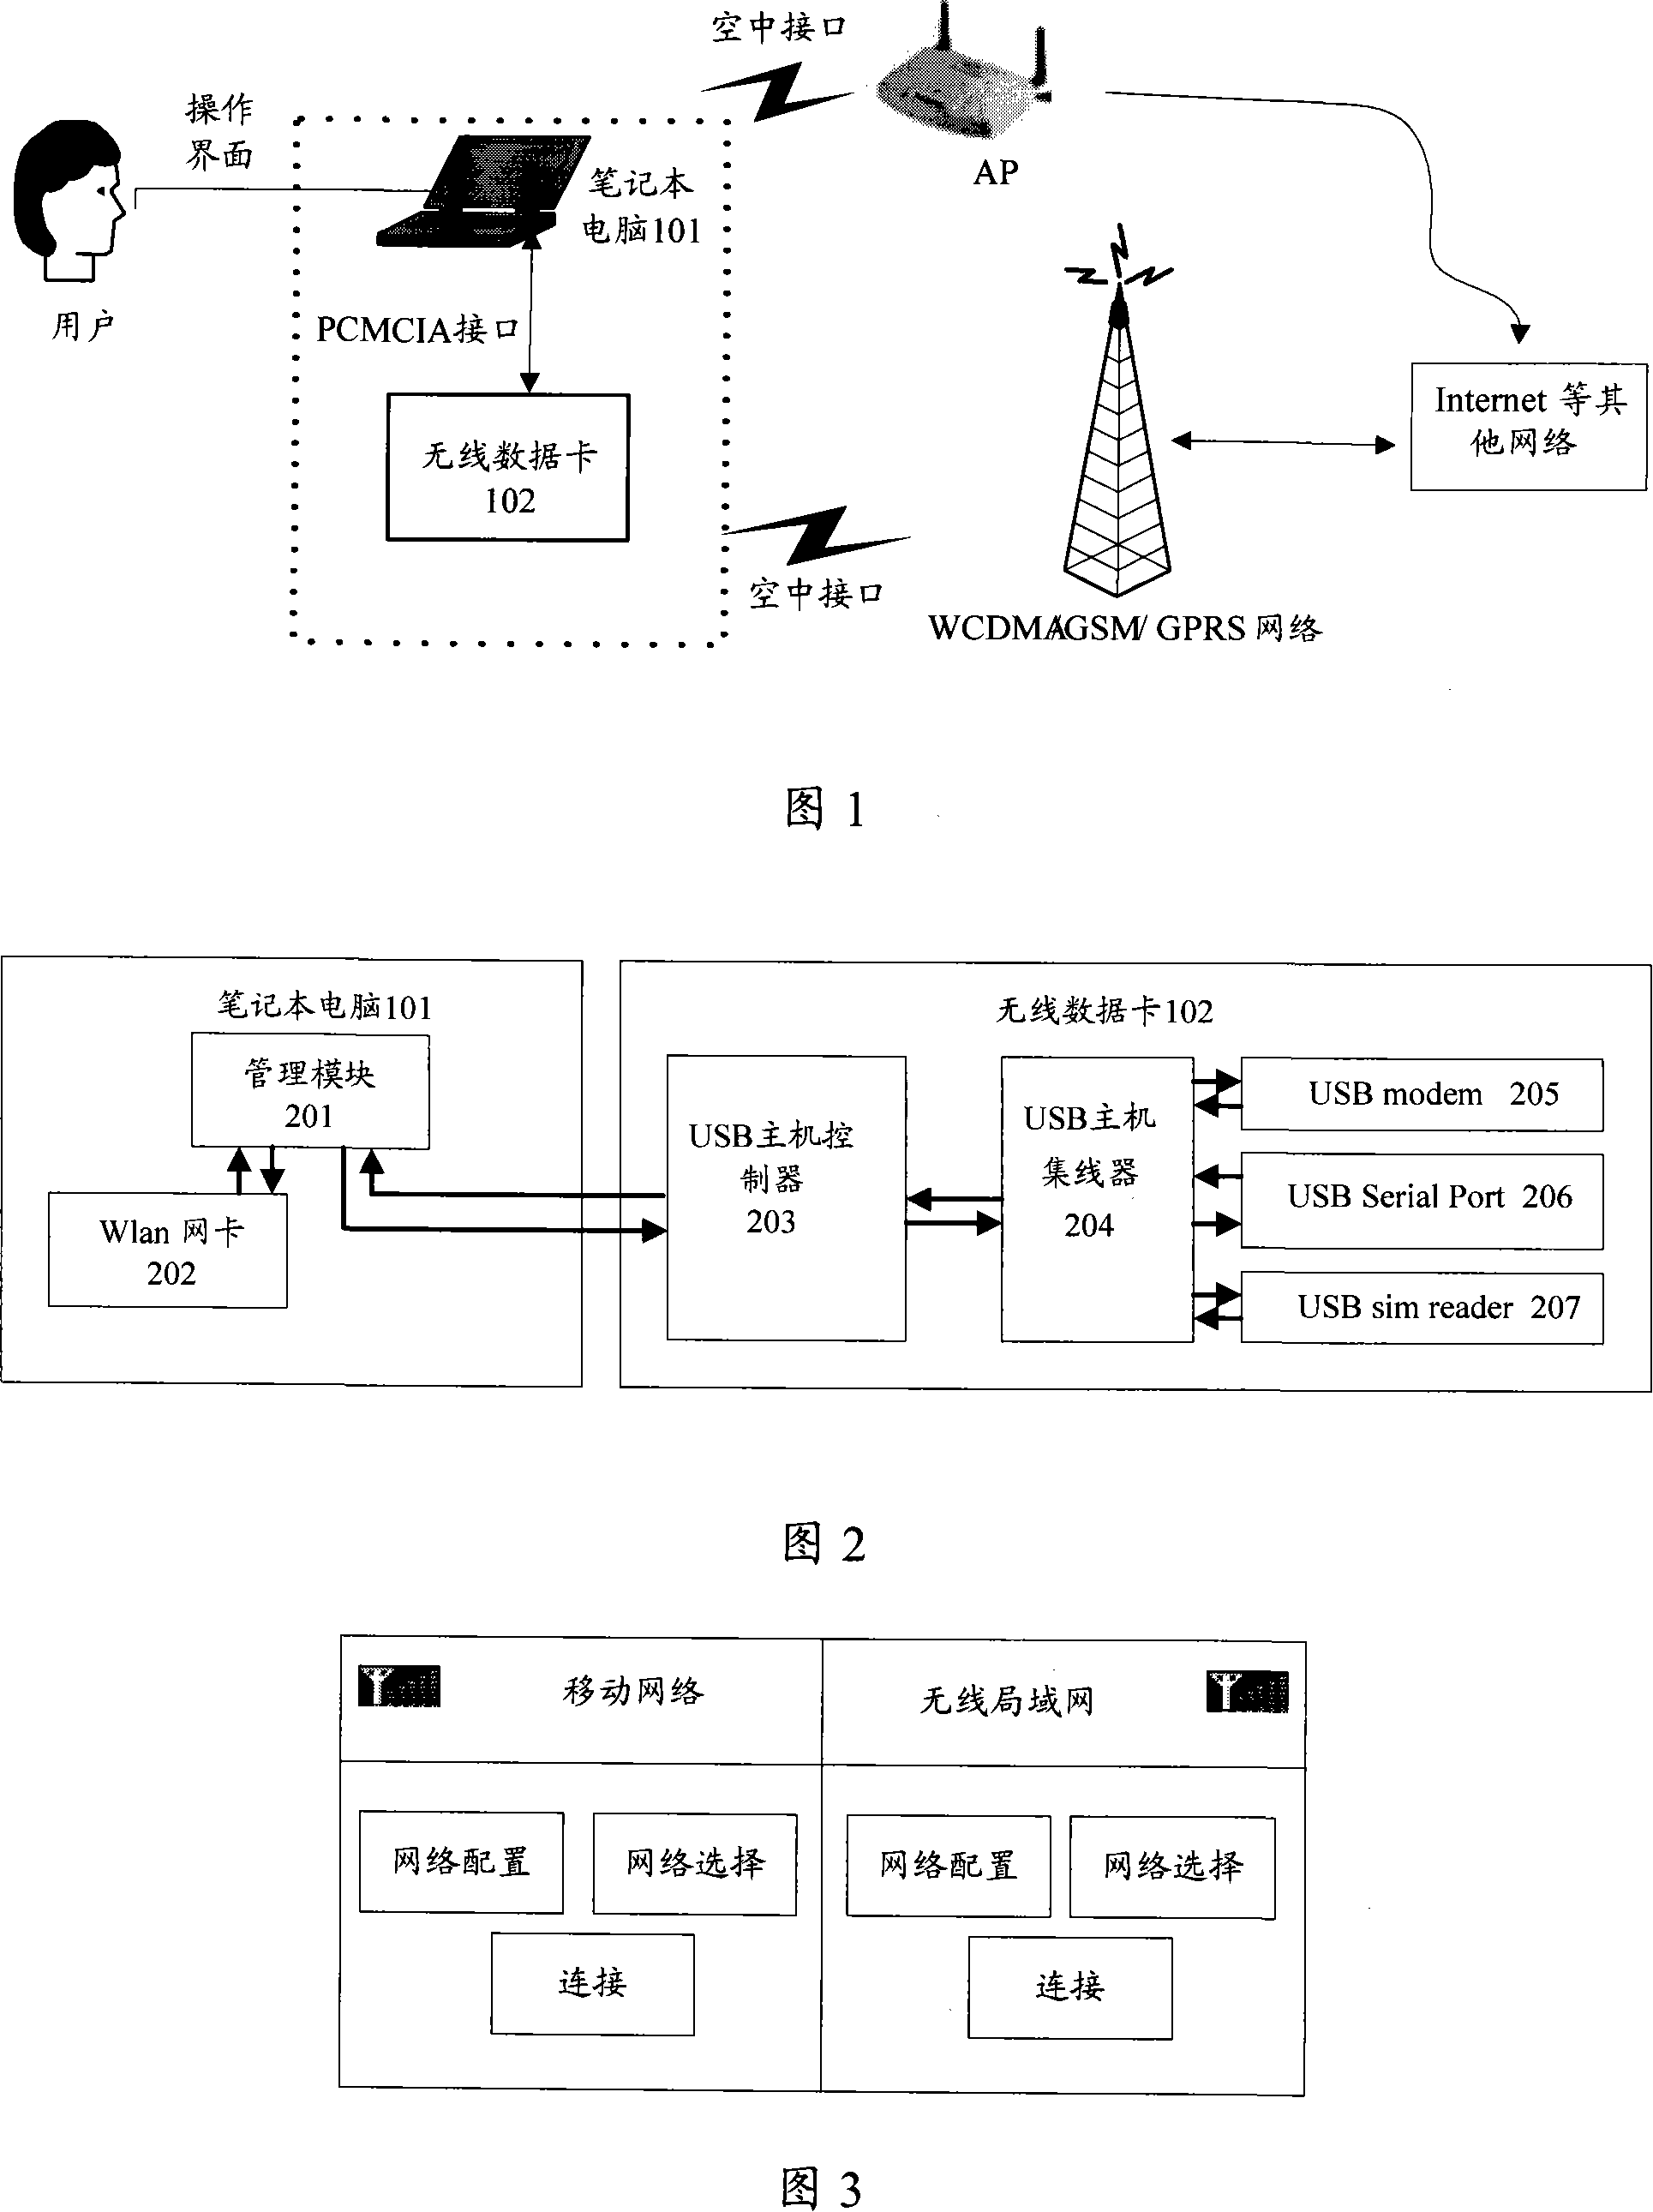 Terminal of selecting access to mobile network or wireless LAN